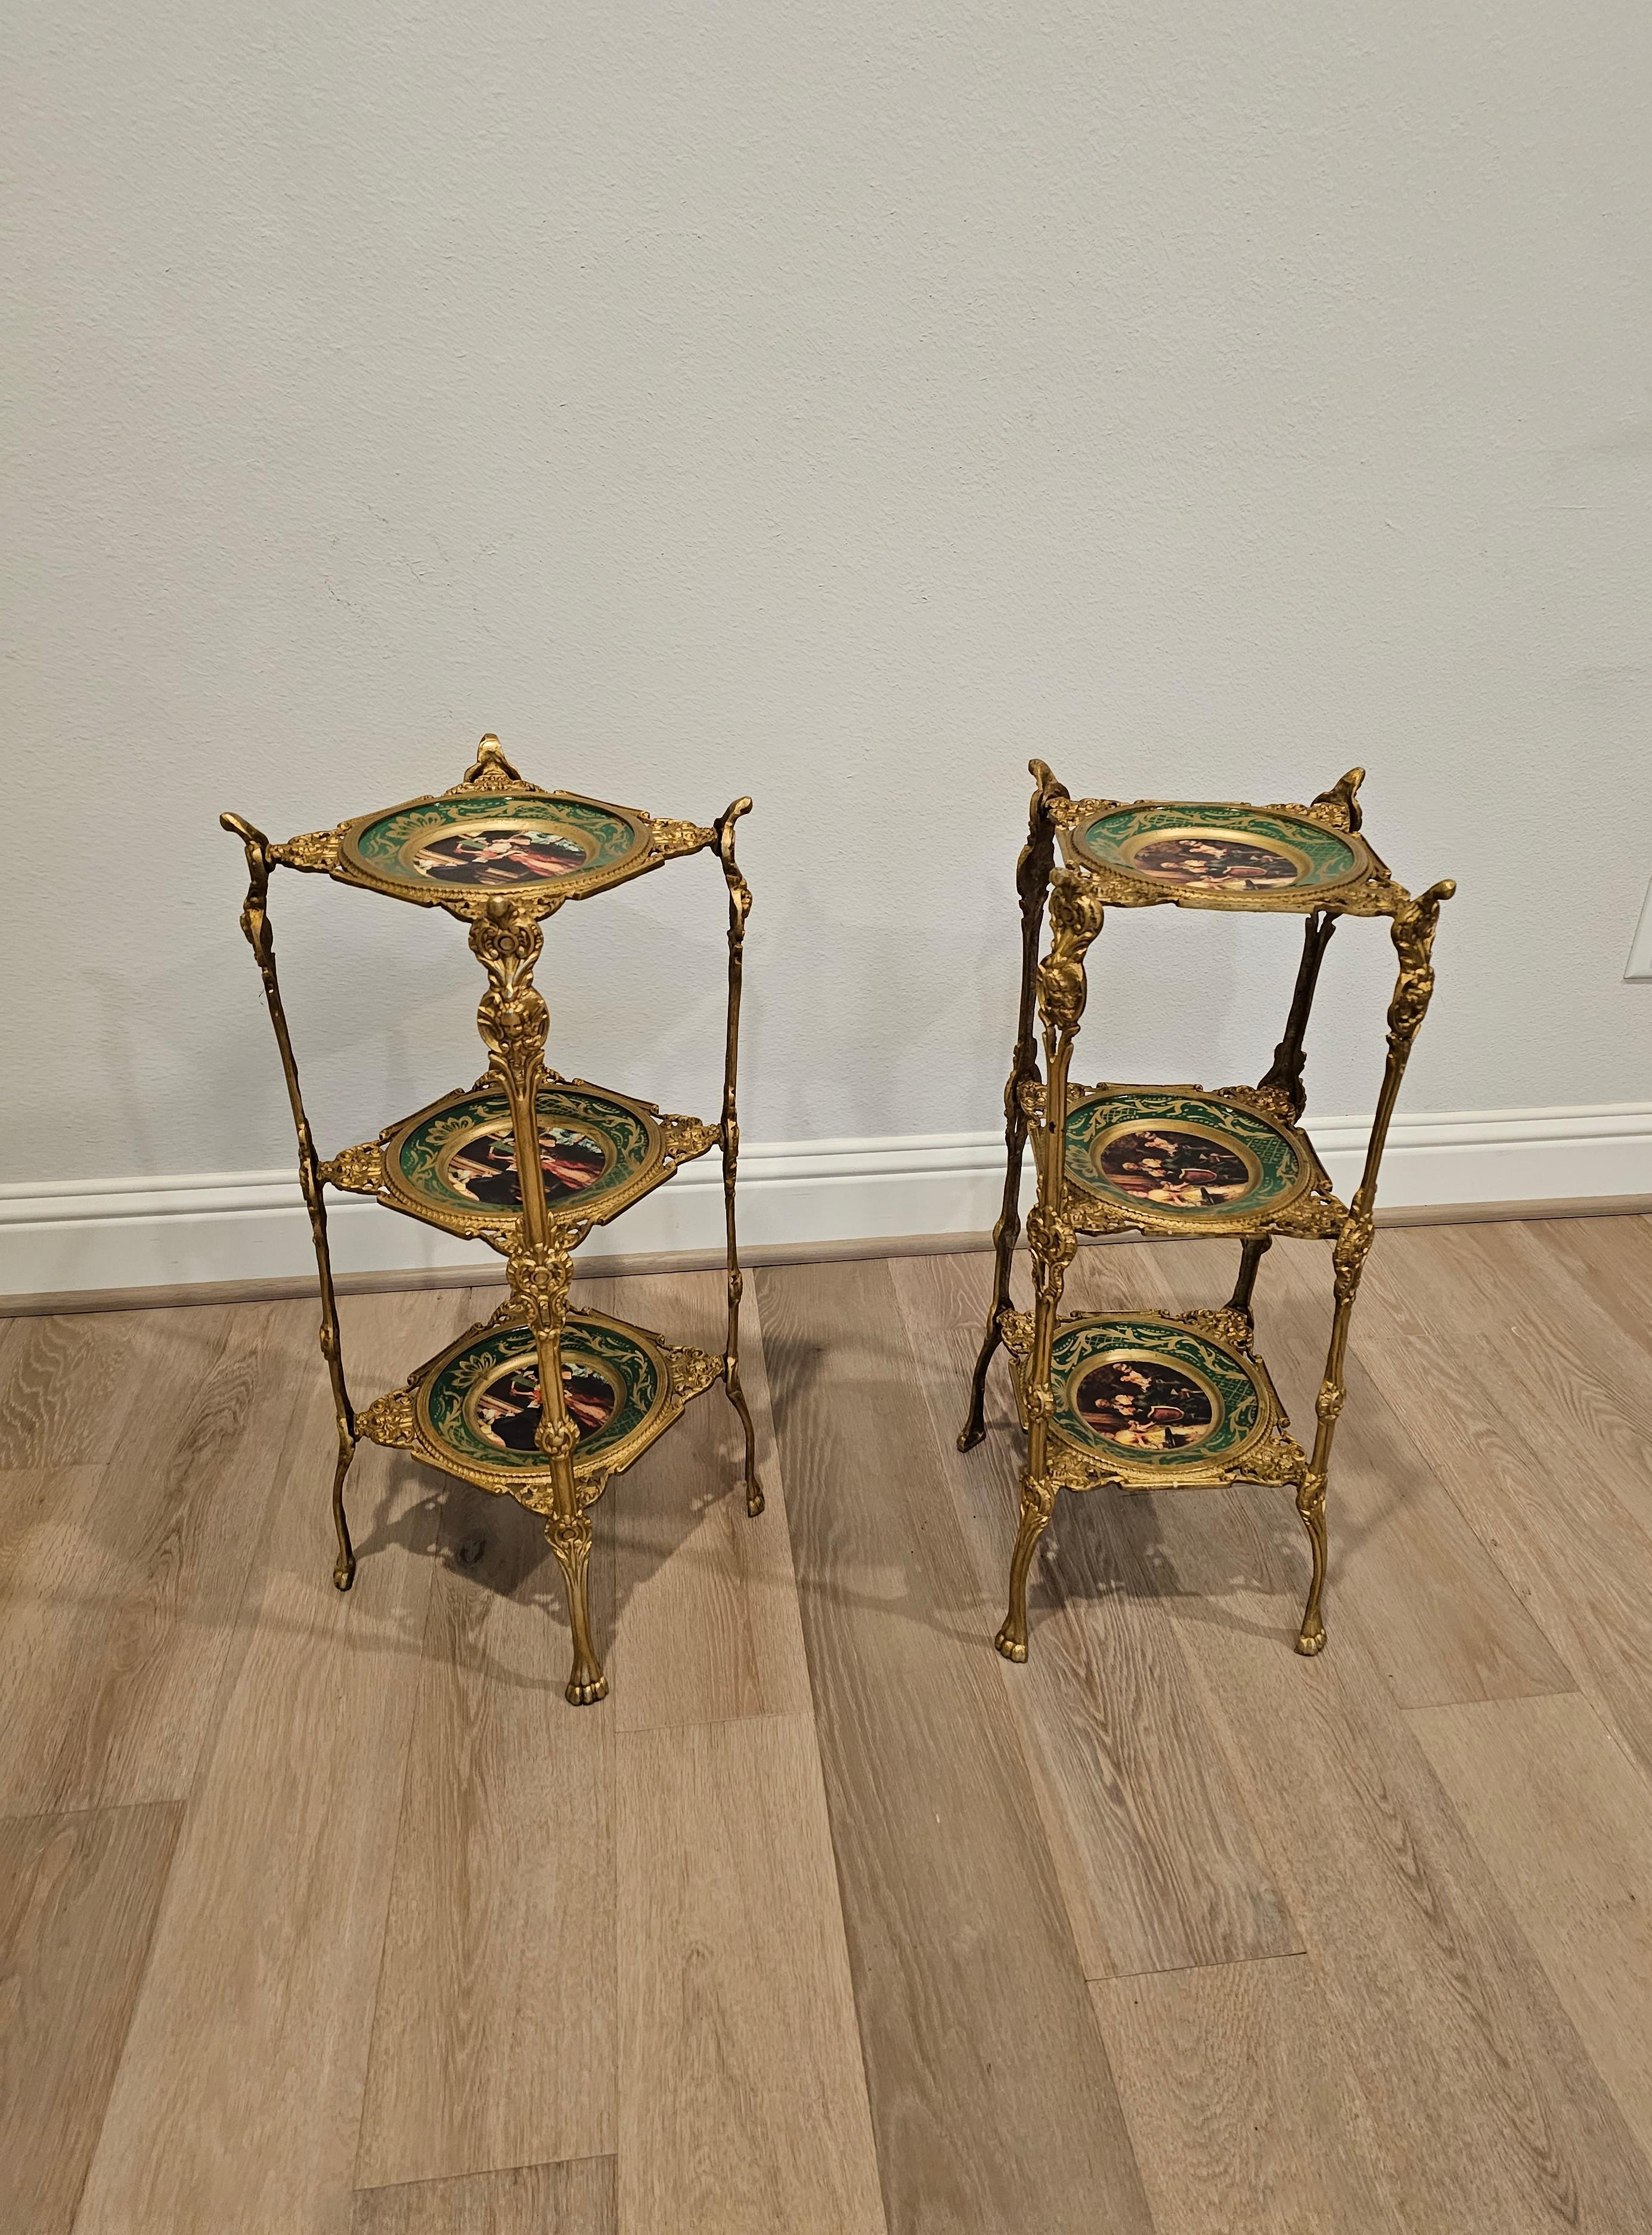 A pair of fine gilt bronze ormolu mounted porcelain tiered étagères. Decedent French Aesthetic Movement styling, circa 1890, brilliant bronze doré supports, three Victorian hand painted parcel gilt porcelain dish-form tiers. 

Ideal size for use